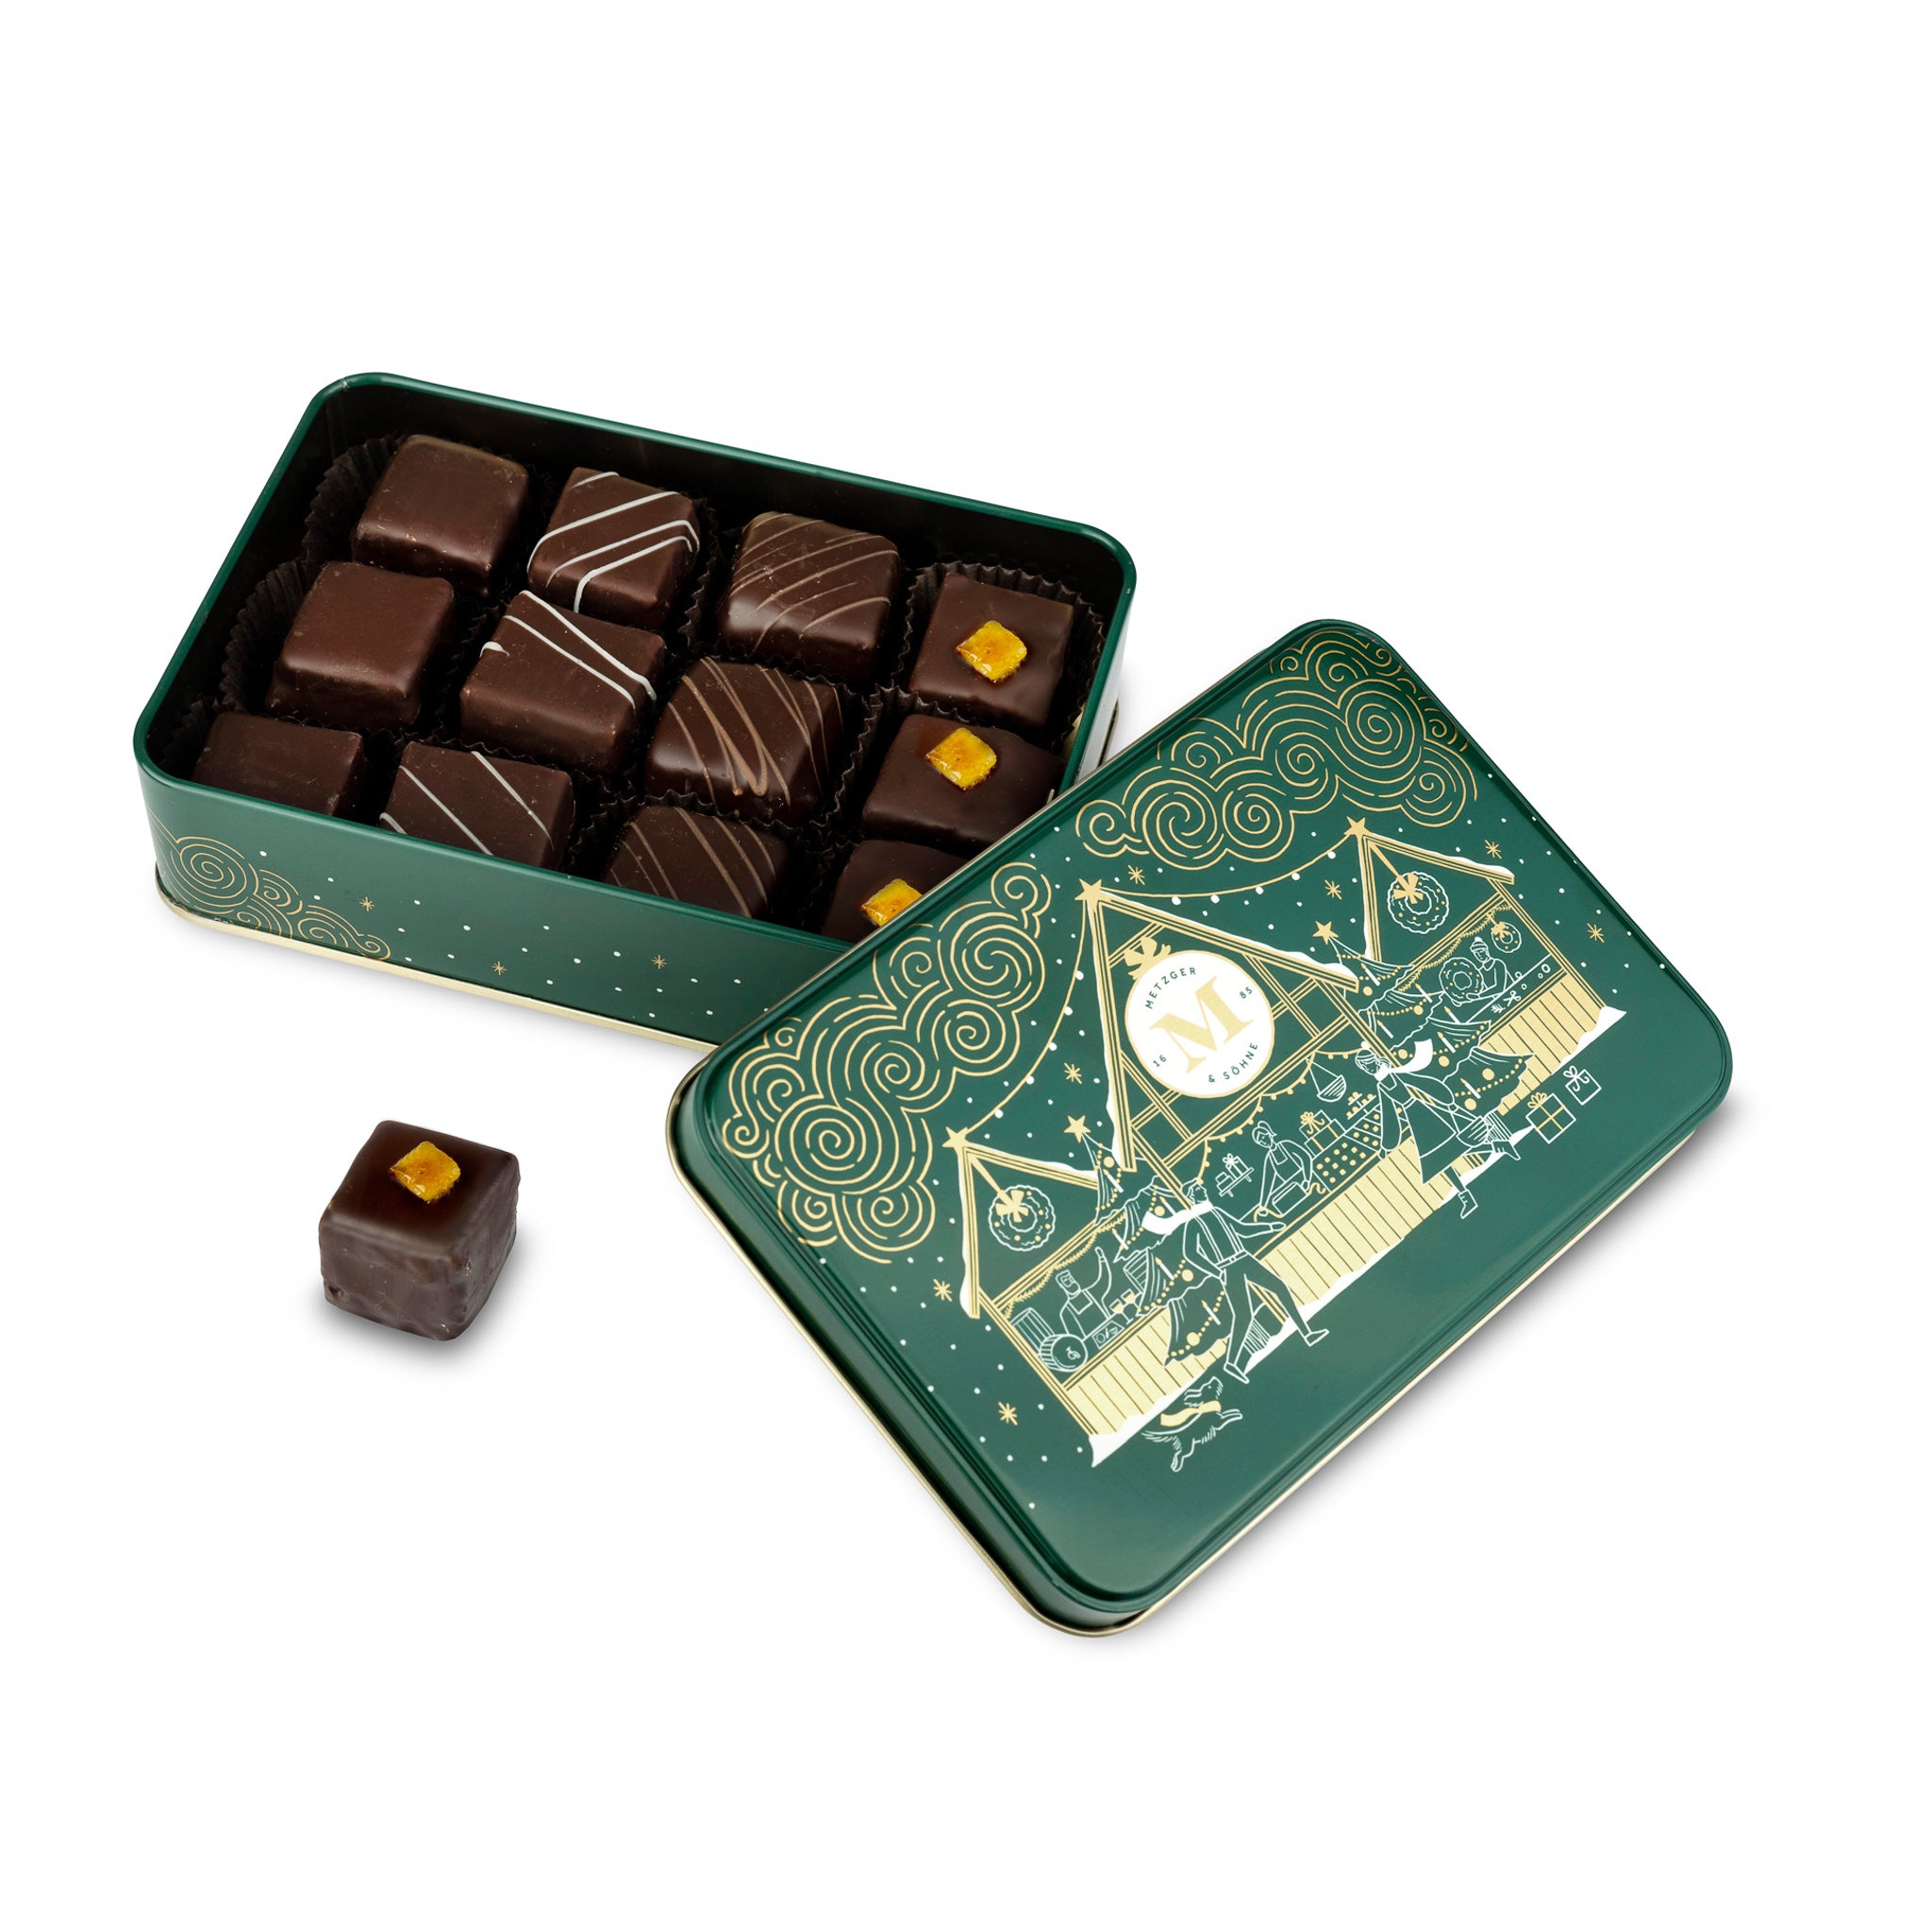 Metzger is pleased to bring you the magic of Viennese Christmas markets with a luxury chocolate tin in emerald green, filled with 12 delectable Lebkuchen pralines. Each praline is layered with Lebkuchen 'honey cake' and filled with marzipan, nuts or fruit jams and jellies, encased in rich chocolate. Vegetarian.